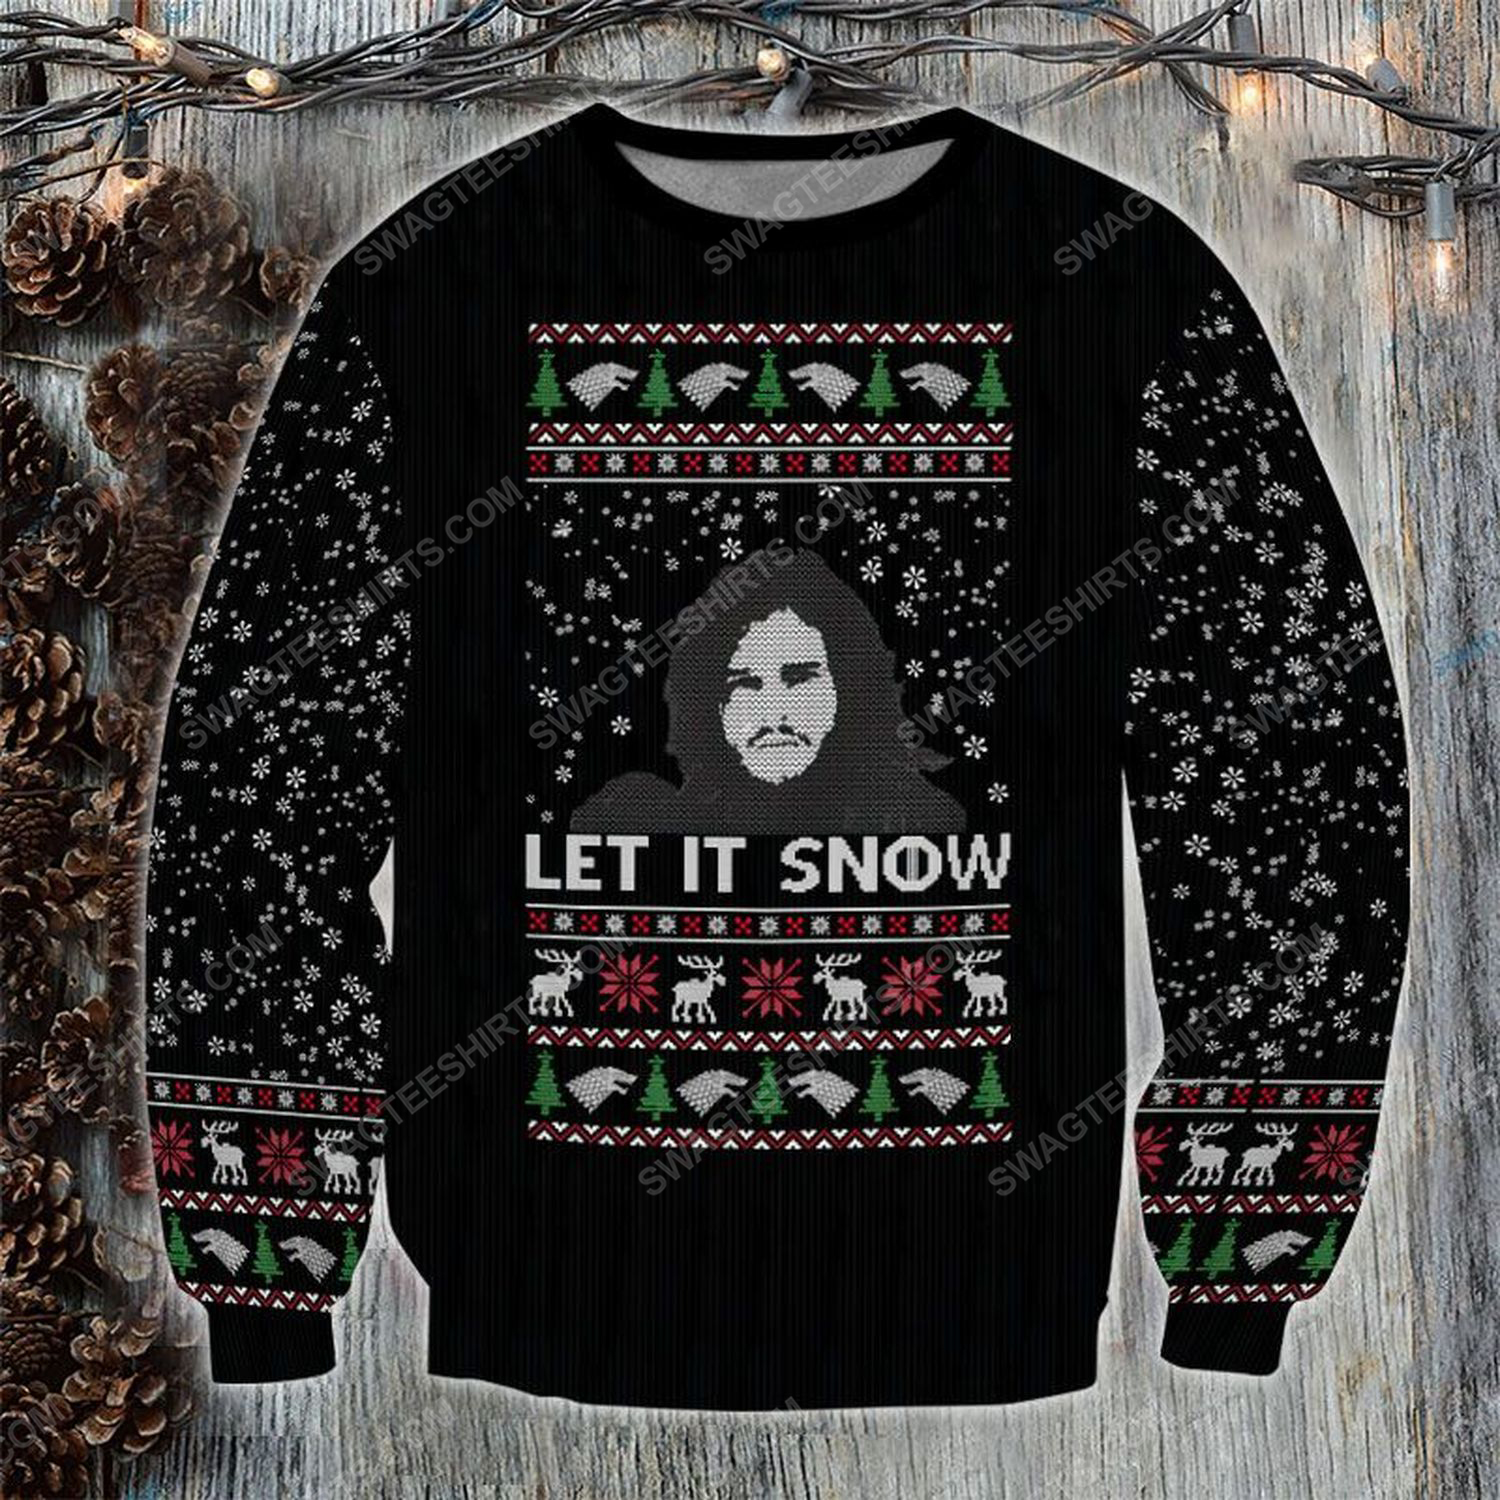 Let it snow game of thrones ​ugly christmas sweater - Copy (2)